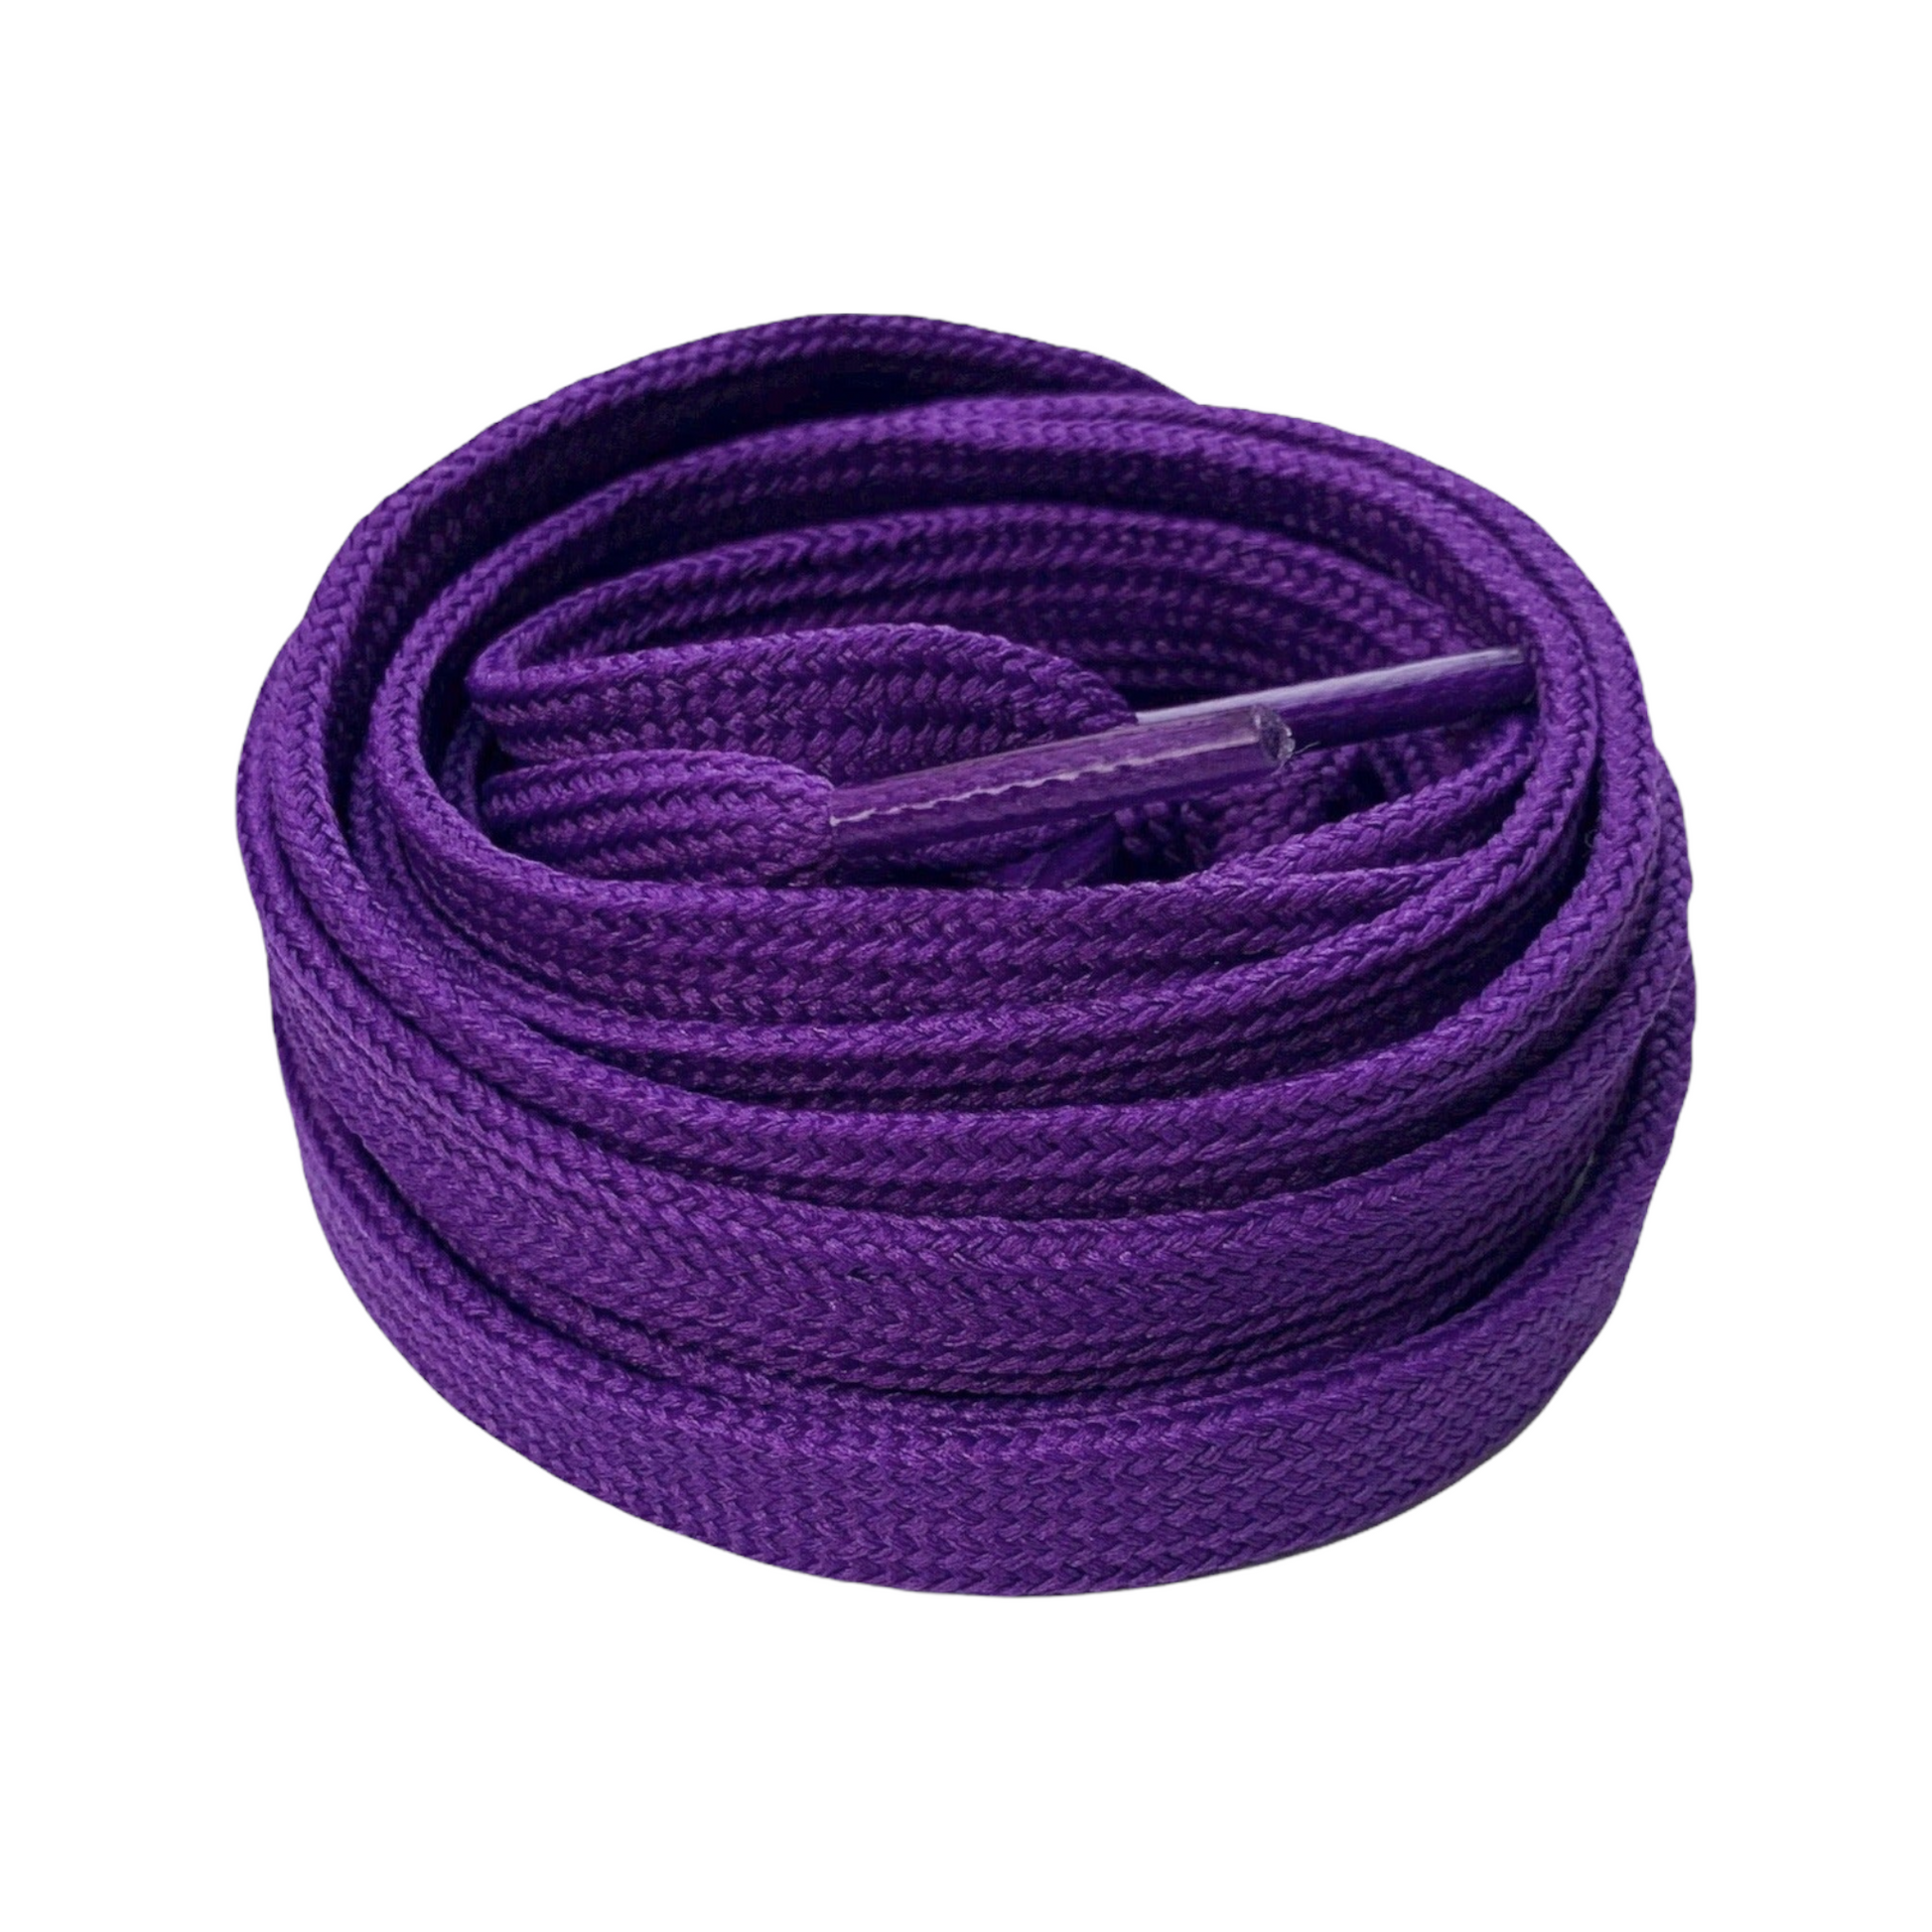 GAME Purple Sneaker Laces - Lace the Game